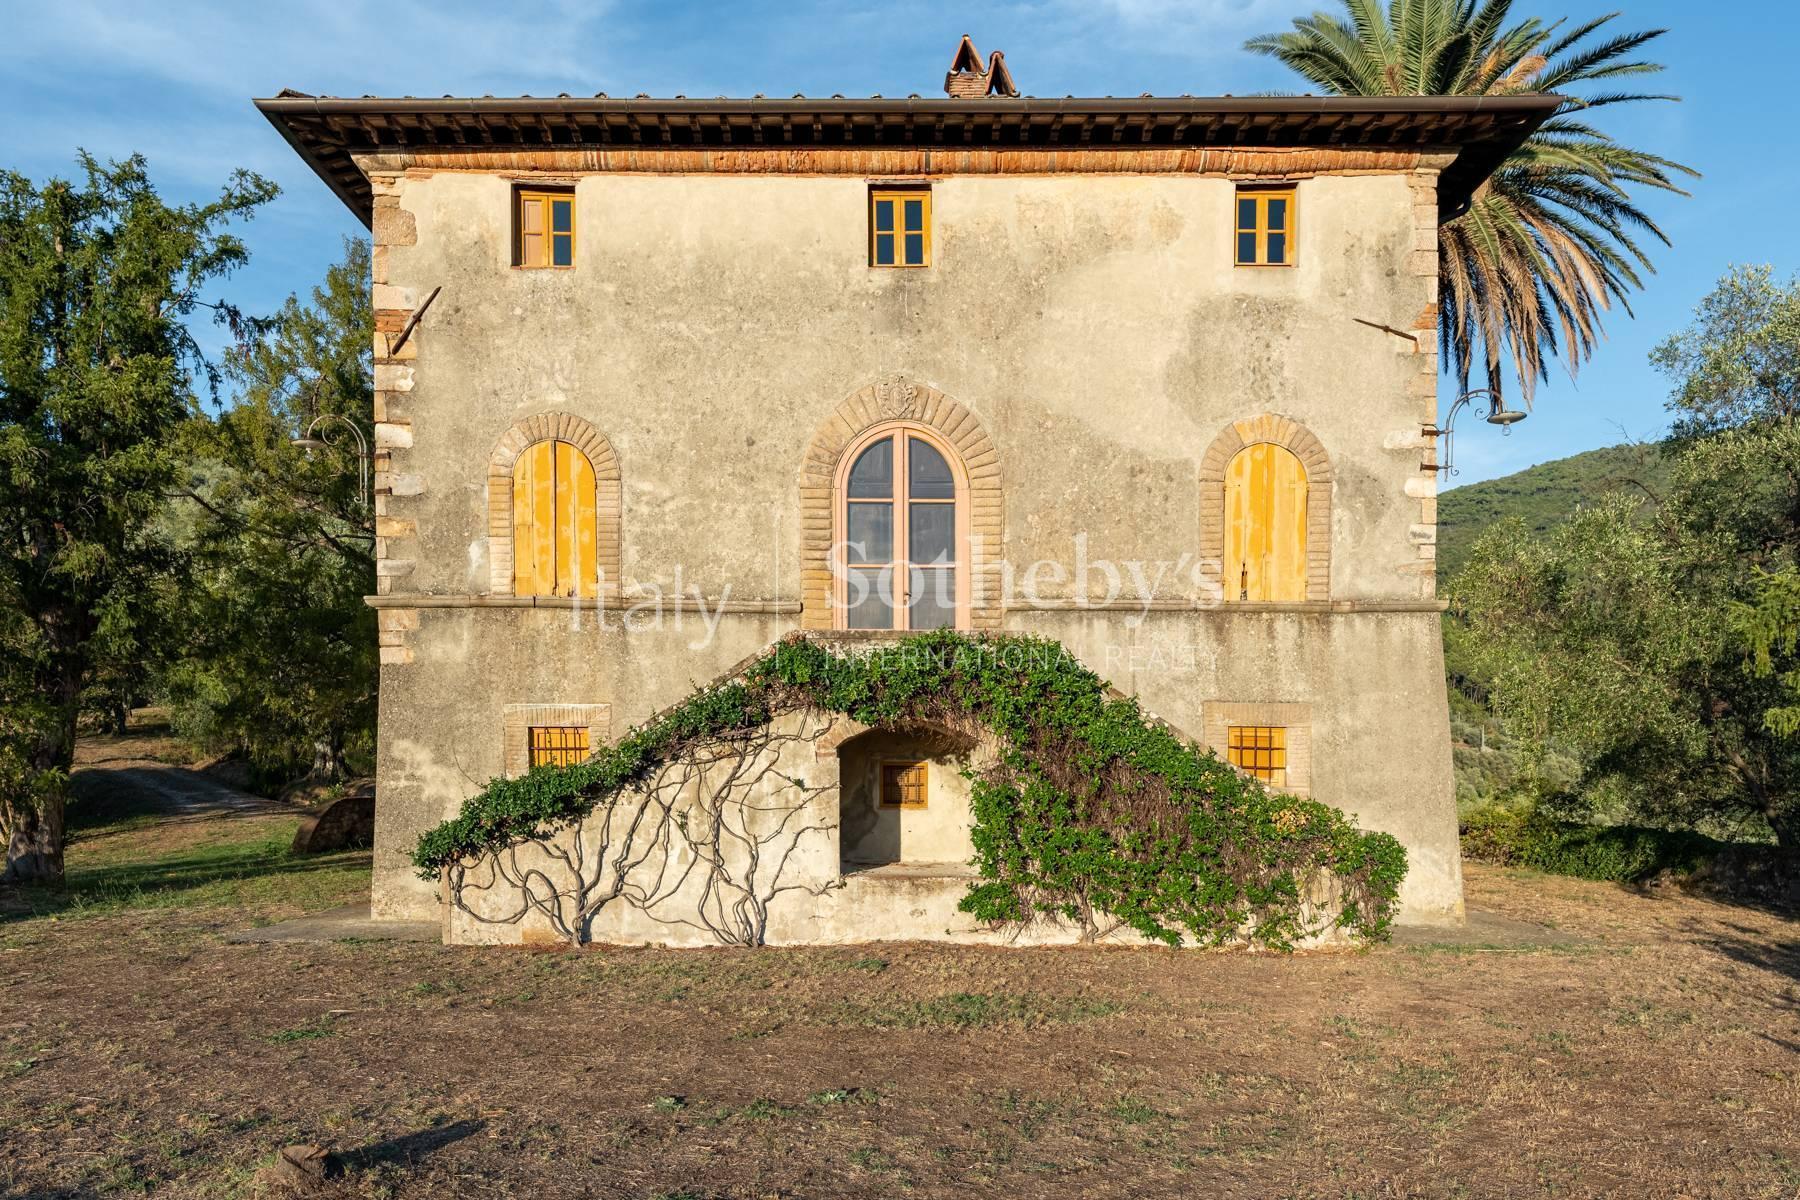 Superb villa with breathtaking views of the Lucca countryside - 4